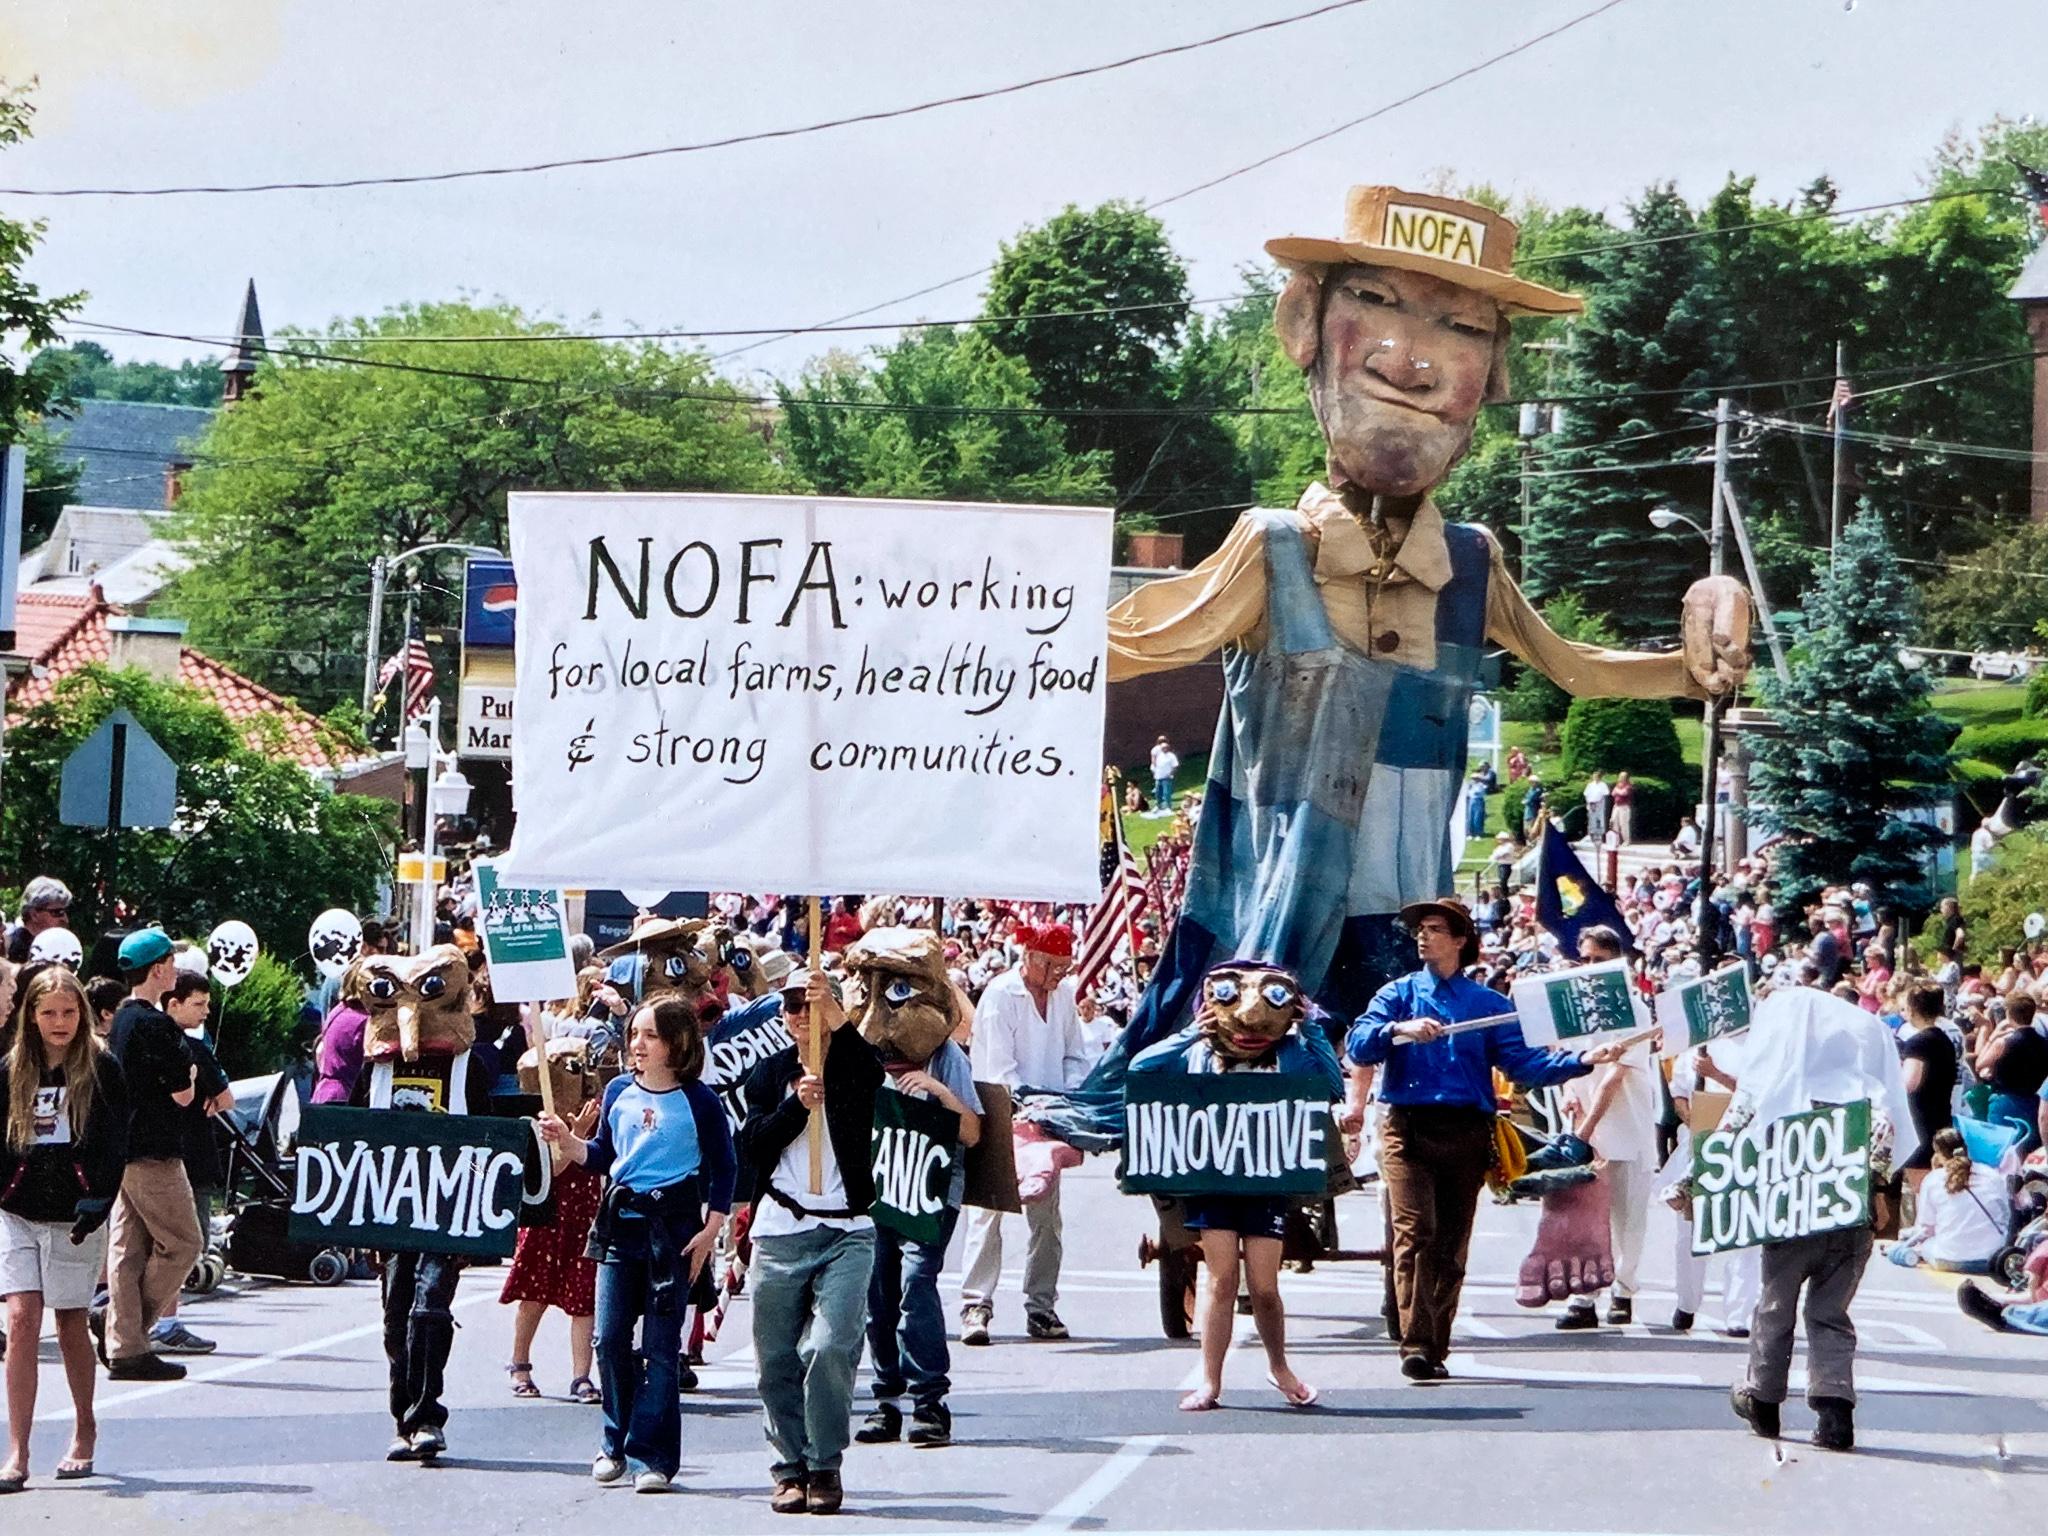 People walk down a street holding hand painted signs that say "dynamic", "innovative", "school lunches", and "NOFA: Working for local farms, healthy food, and strong communities". In the crown is also a 20 foot tall puppet wearing a hat that says "NOFA". 